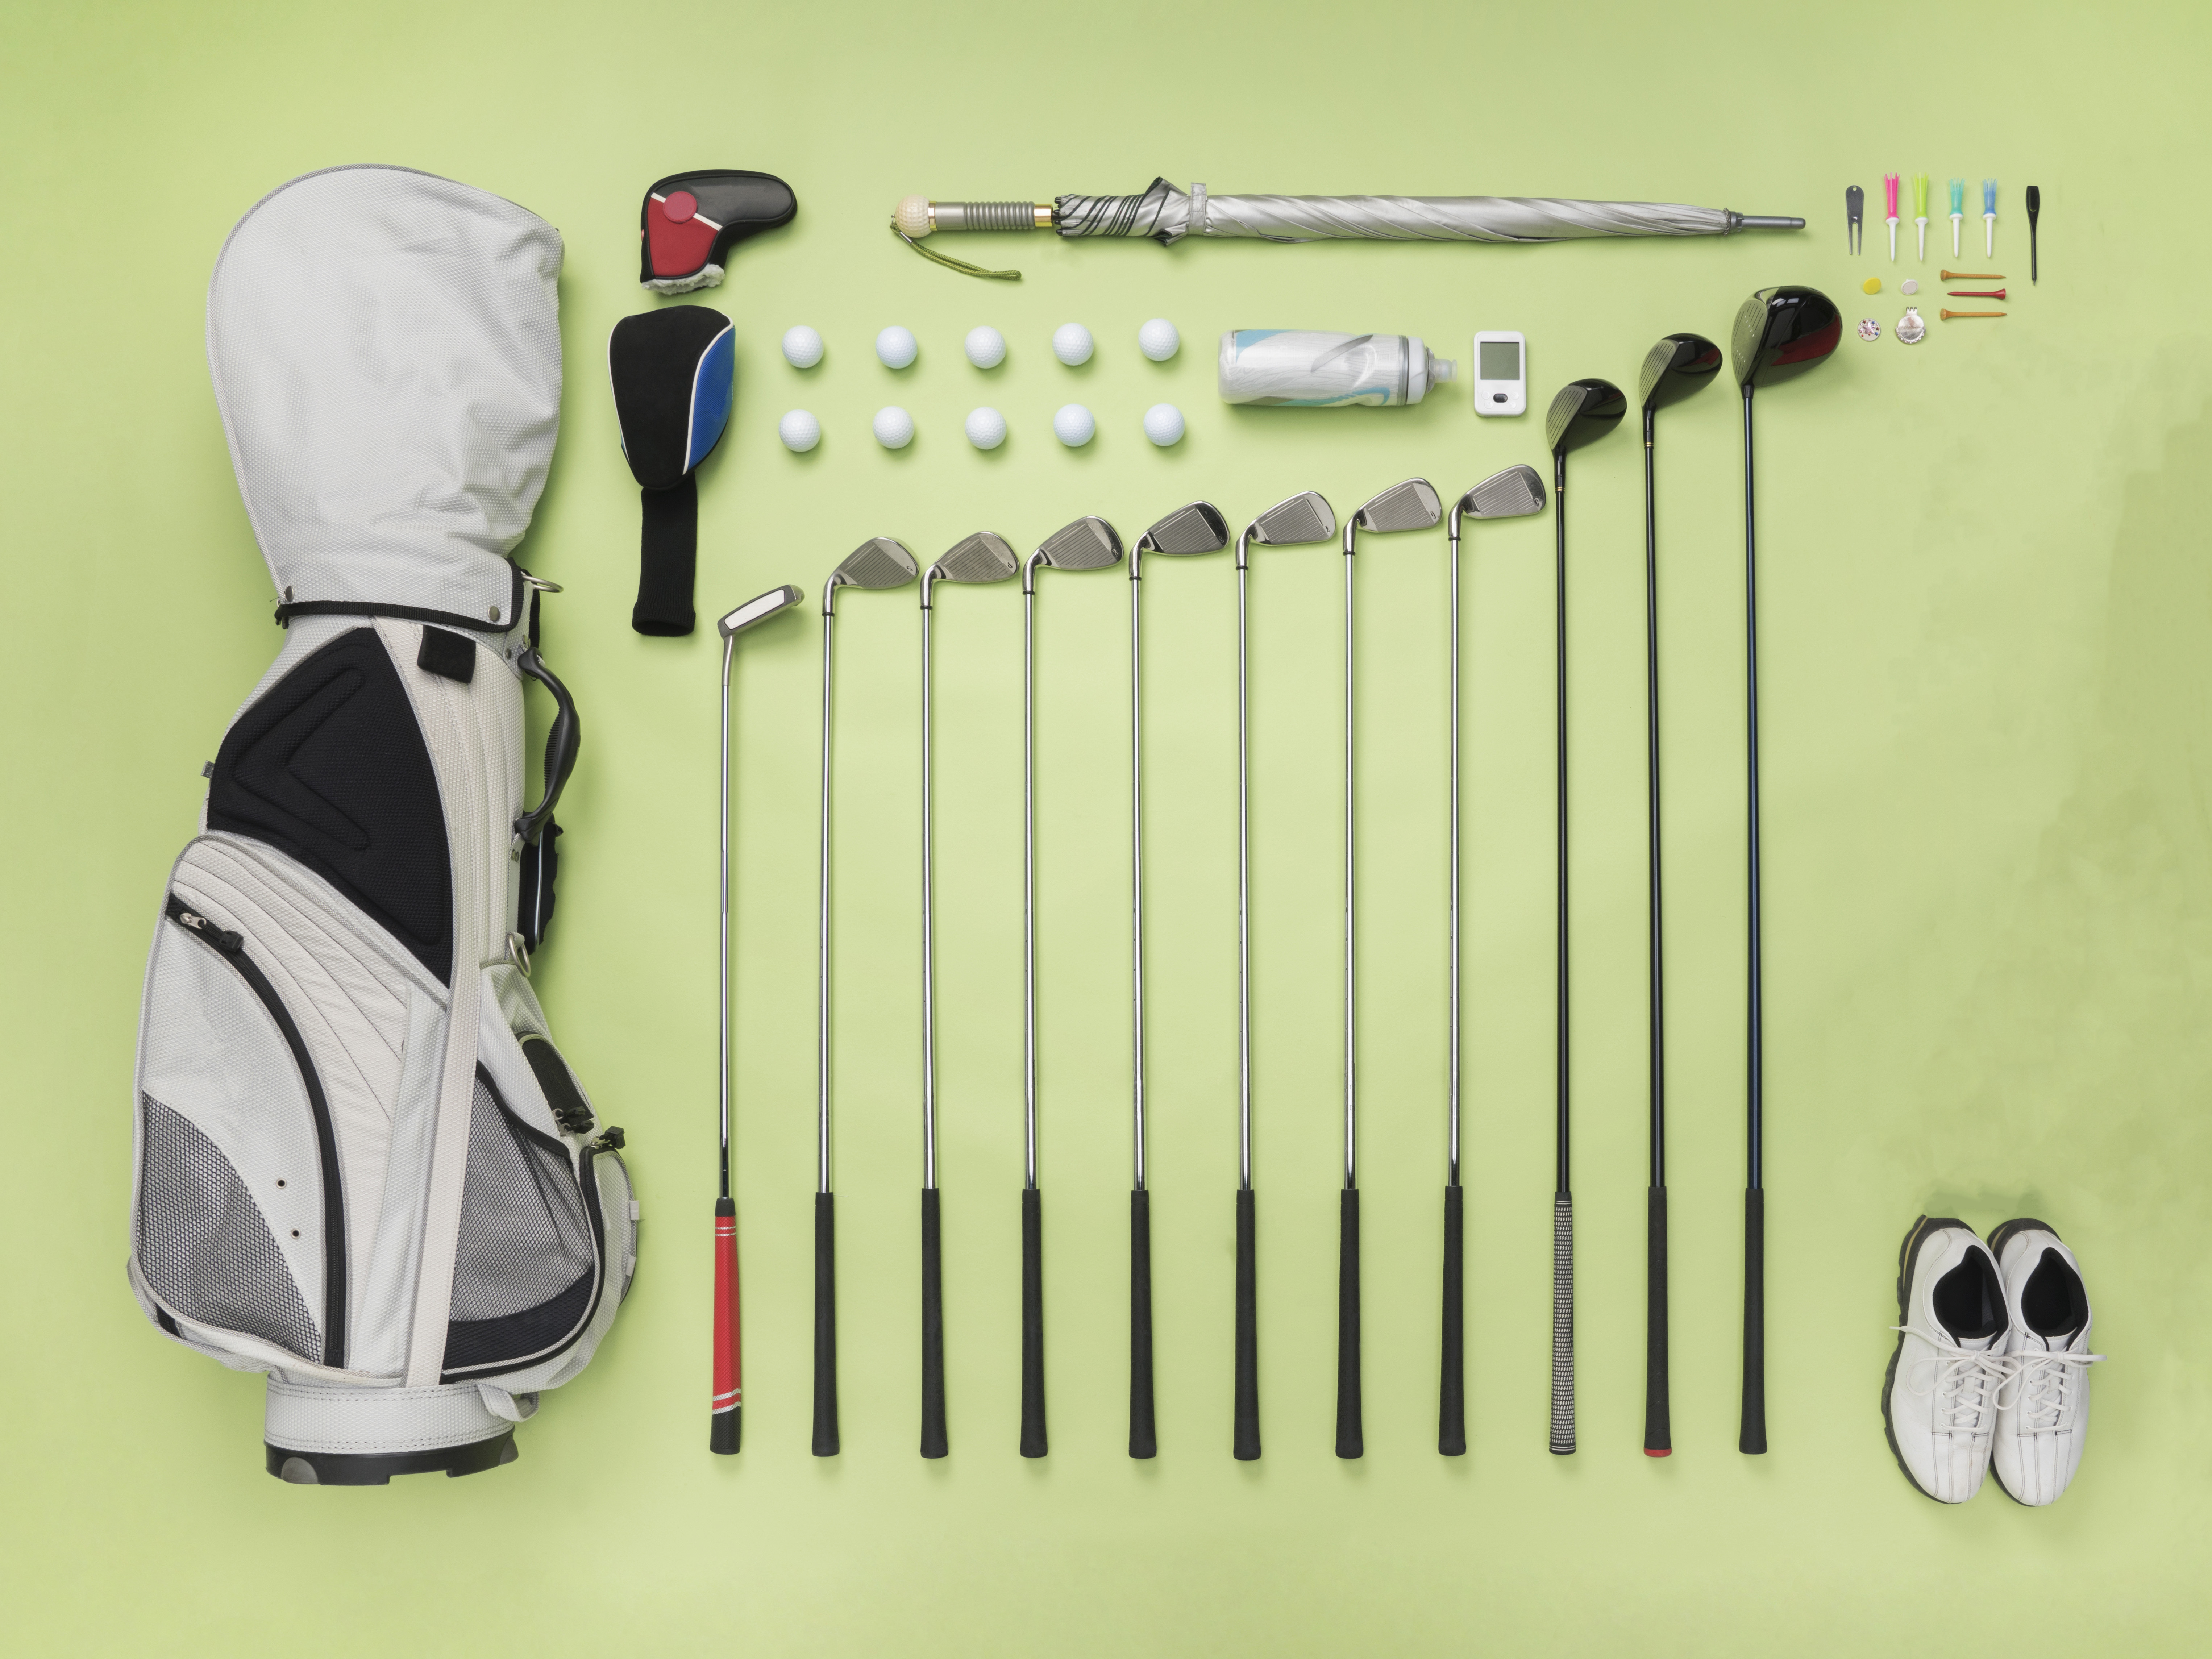 Golf bag and accessories that need storage